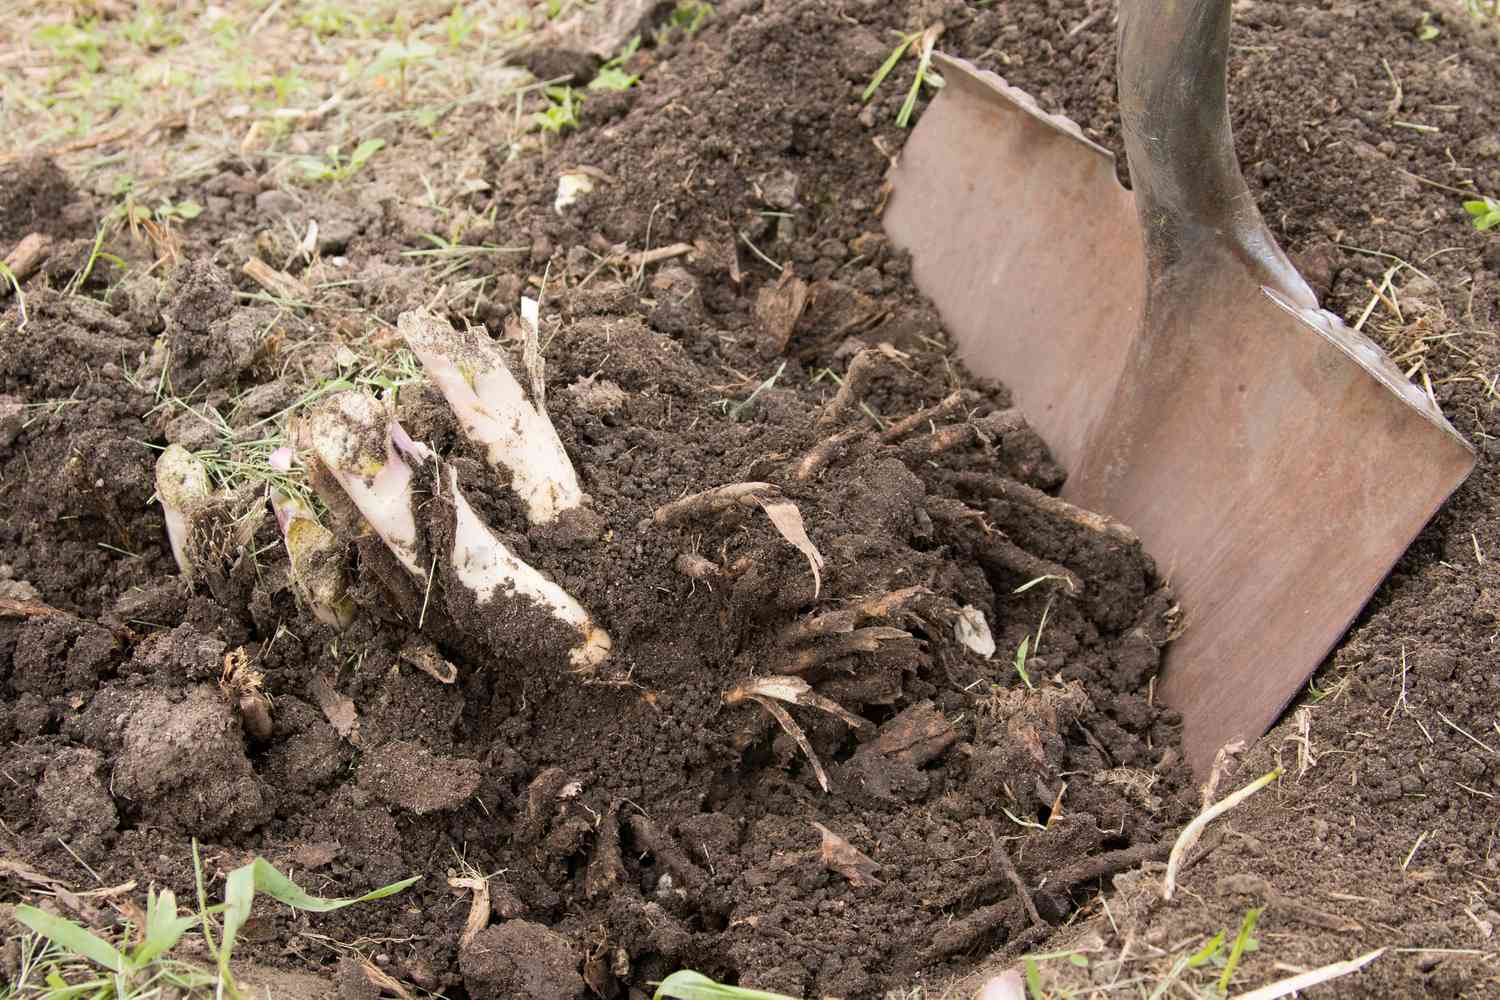 Shovel digging up soil cutting roots of asparagus plant